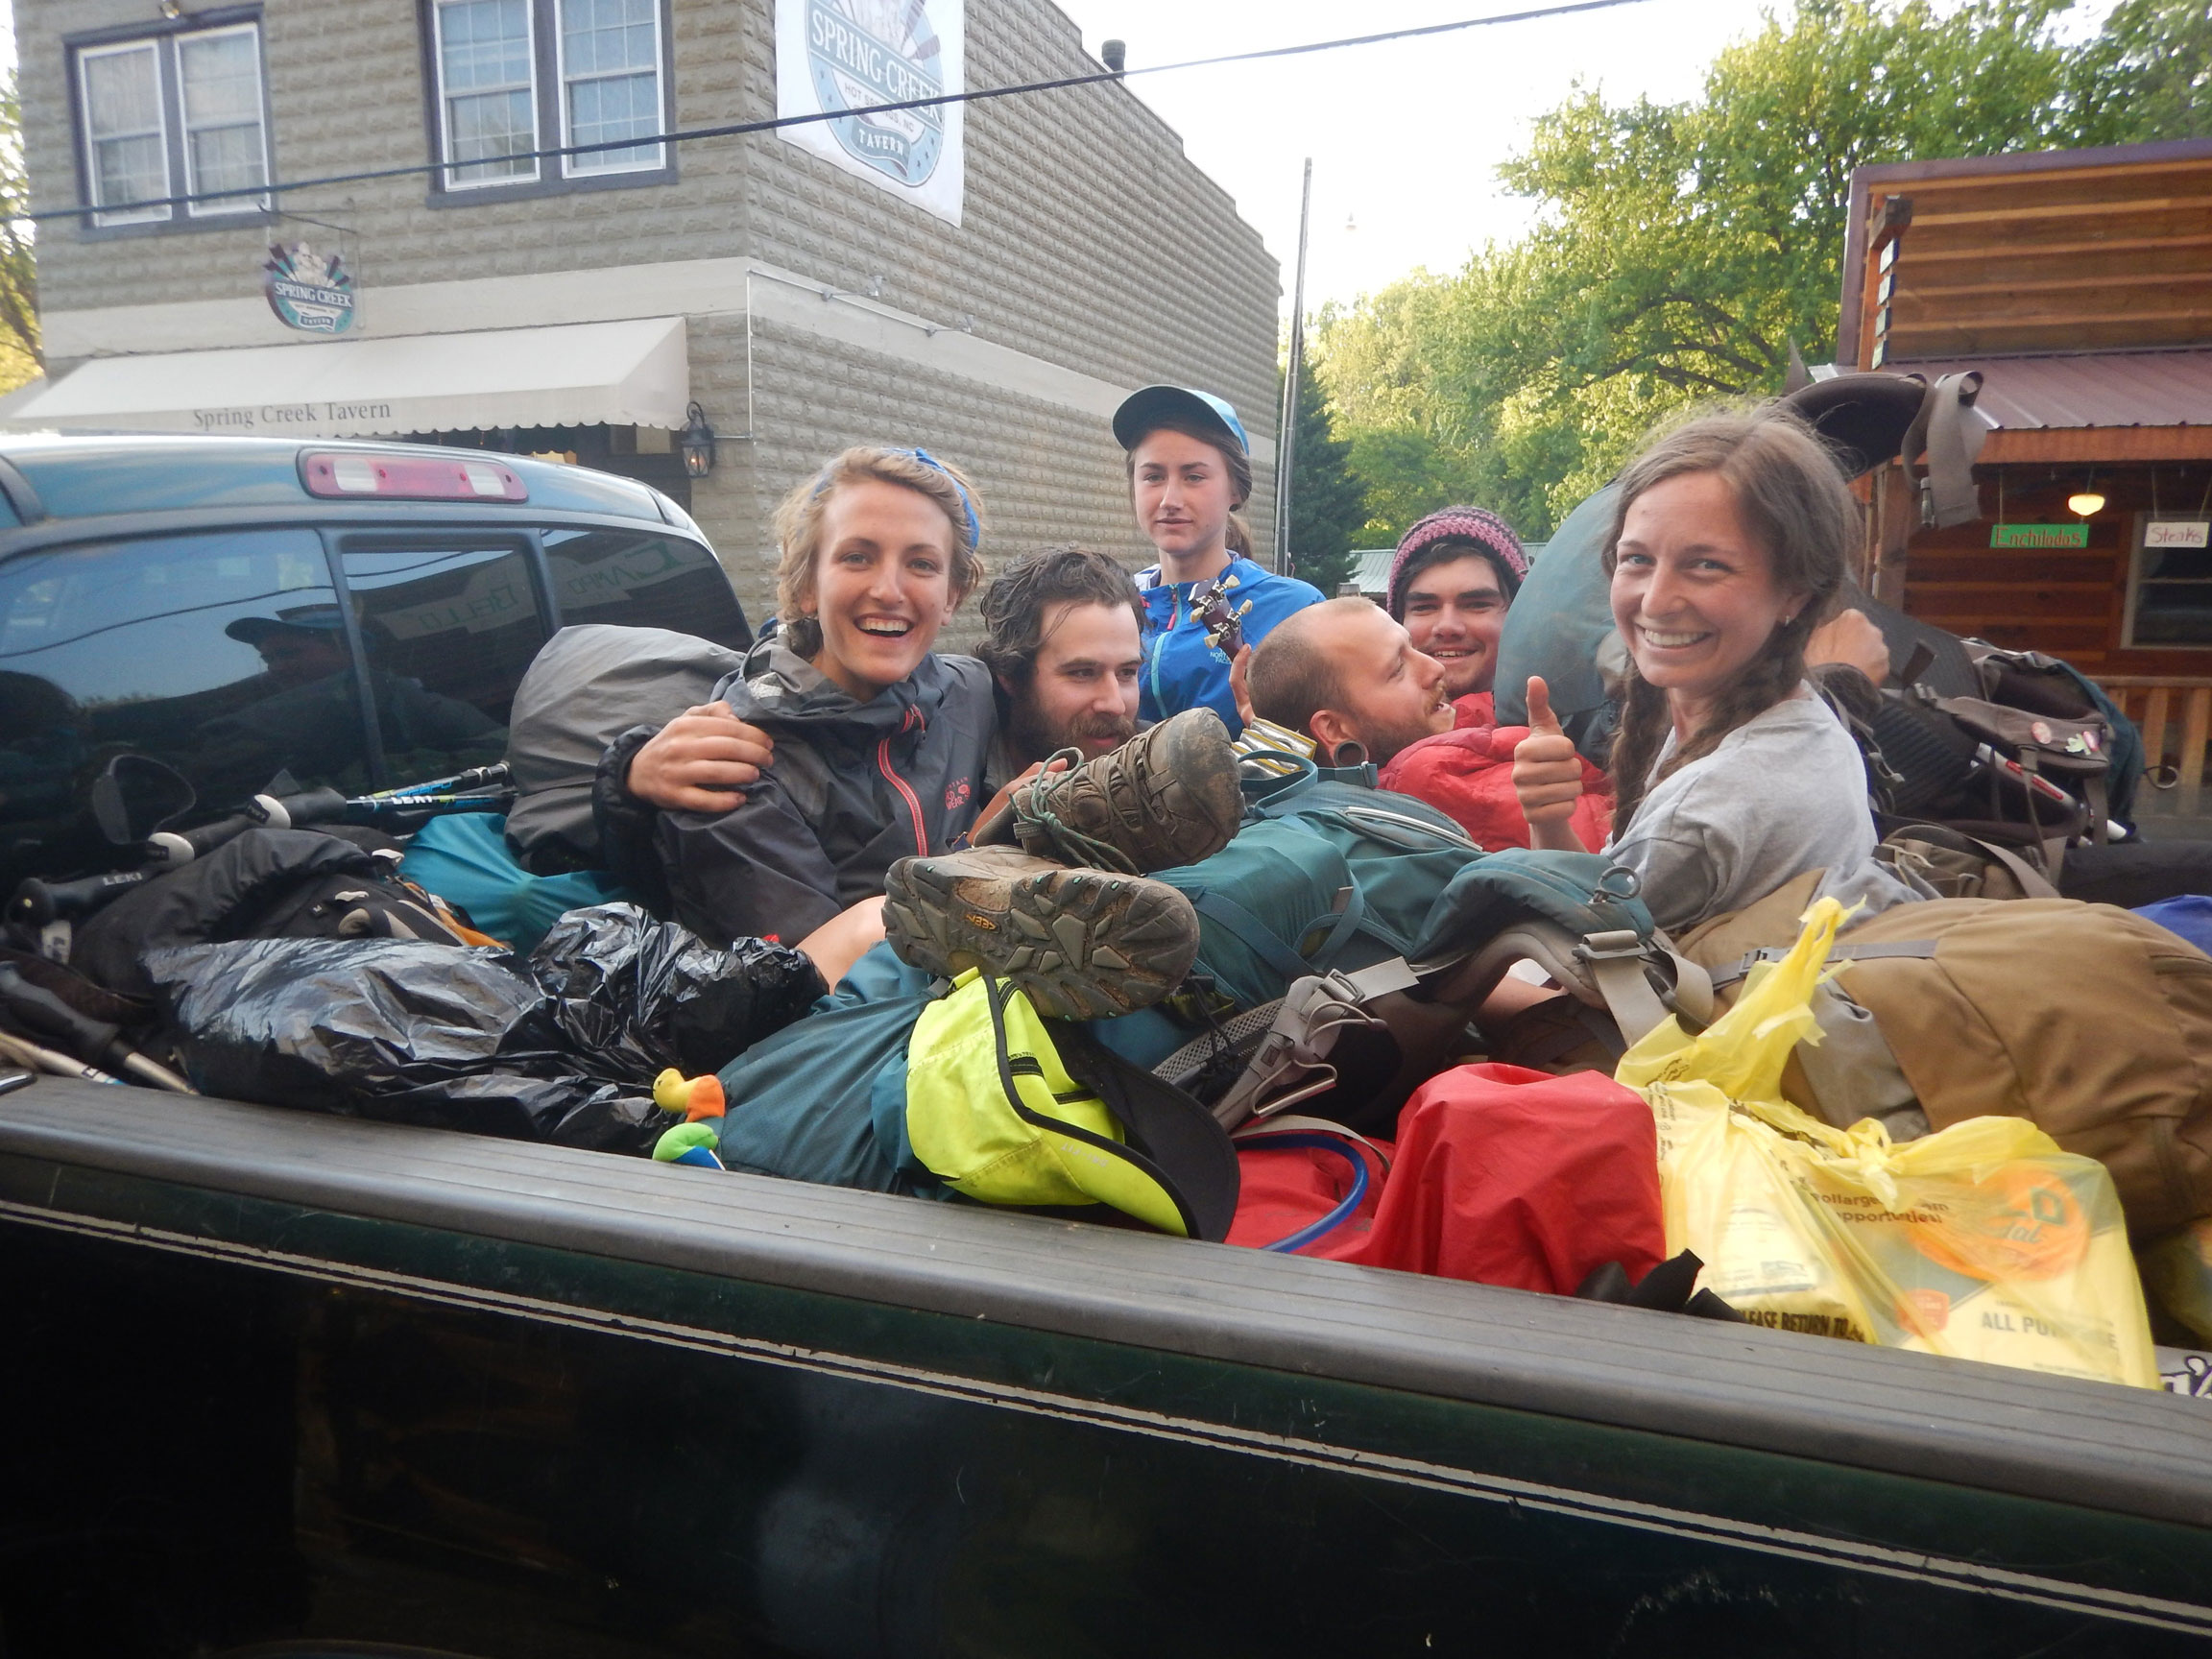 Thru-hikers piling into the back of a pickup to hitchhike